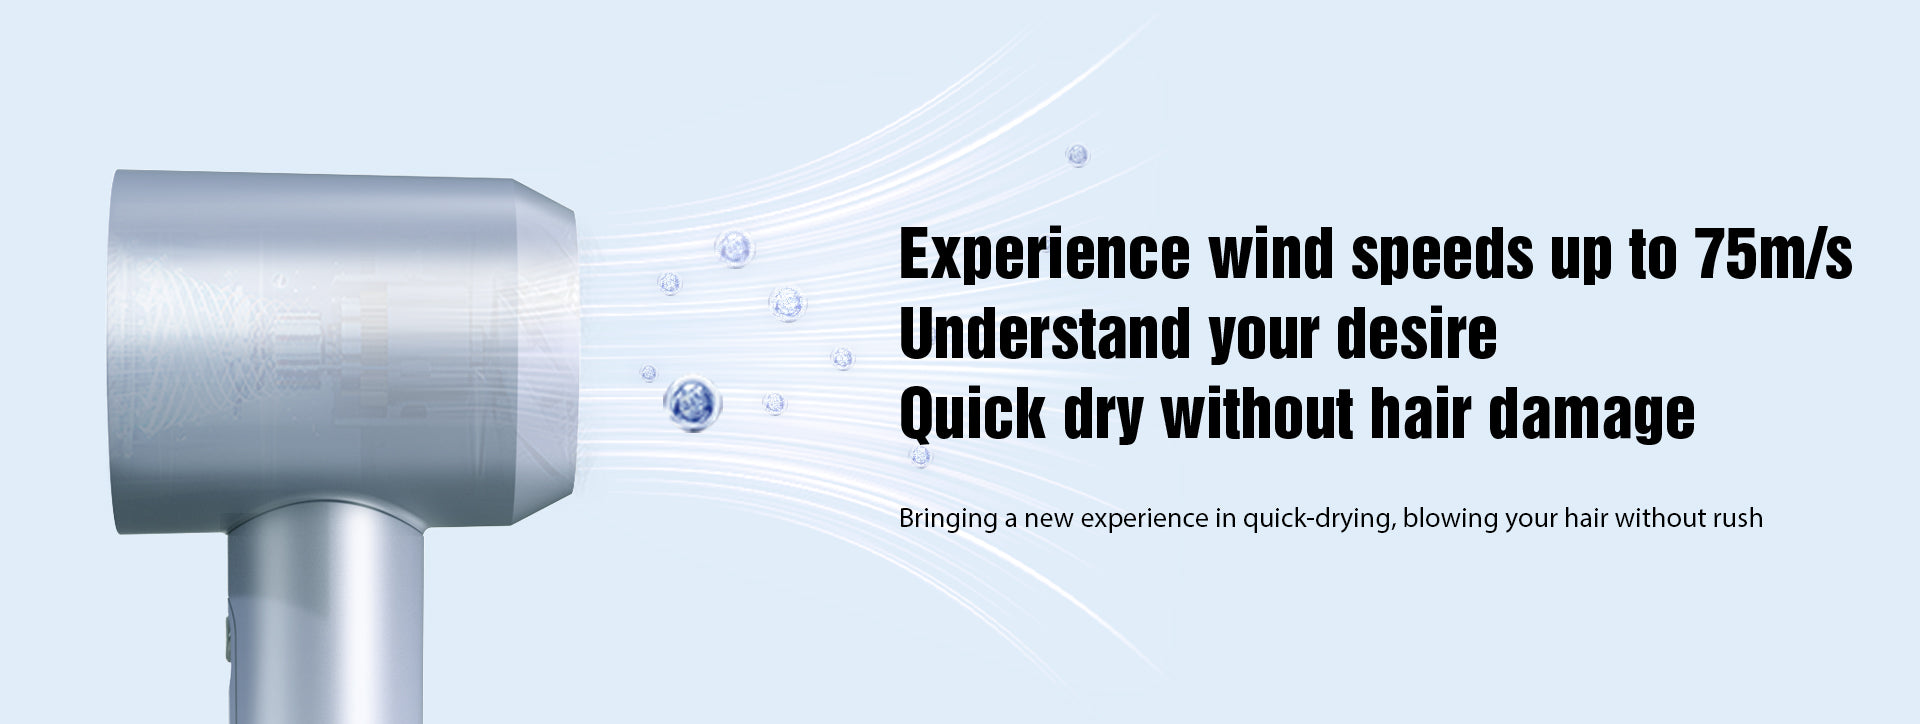 Experience_wind_speeds_up_to_75msUnderstand_your_desireuick_dry_without_hair_damage